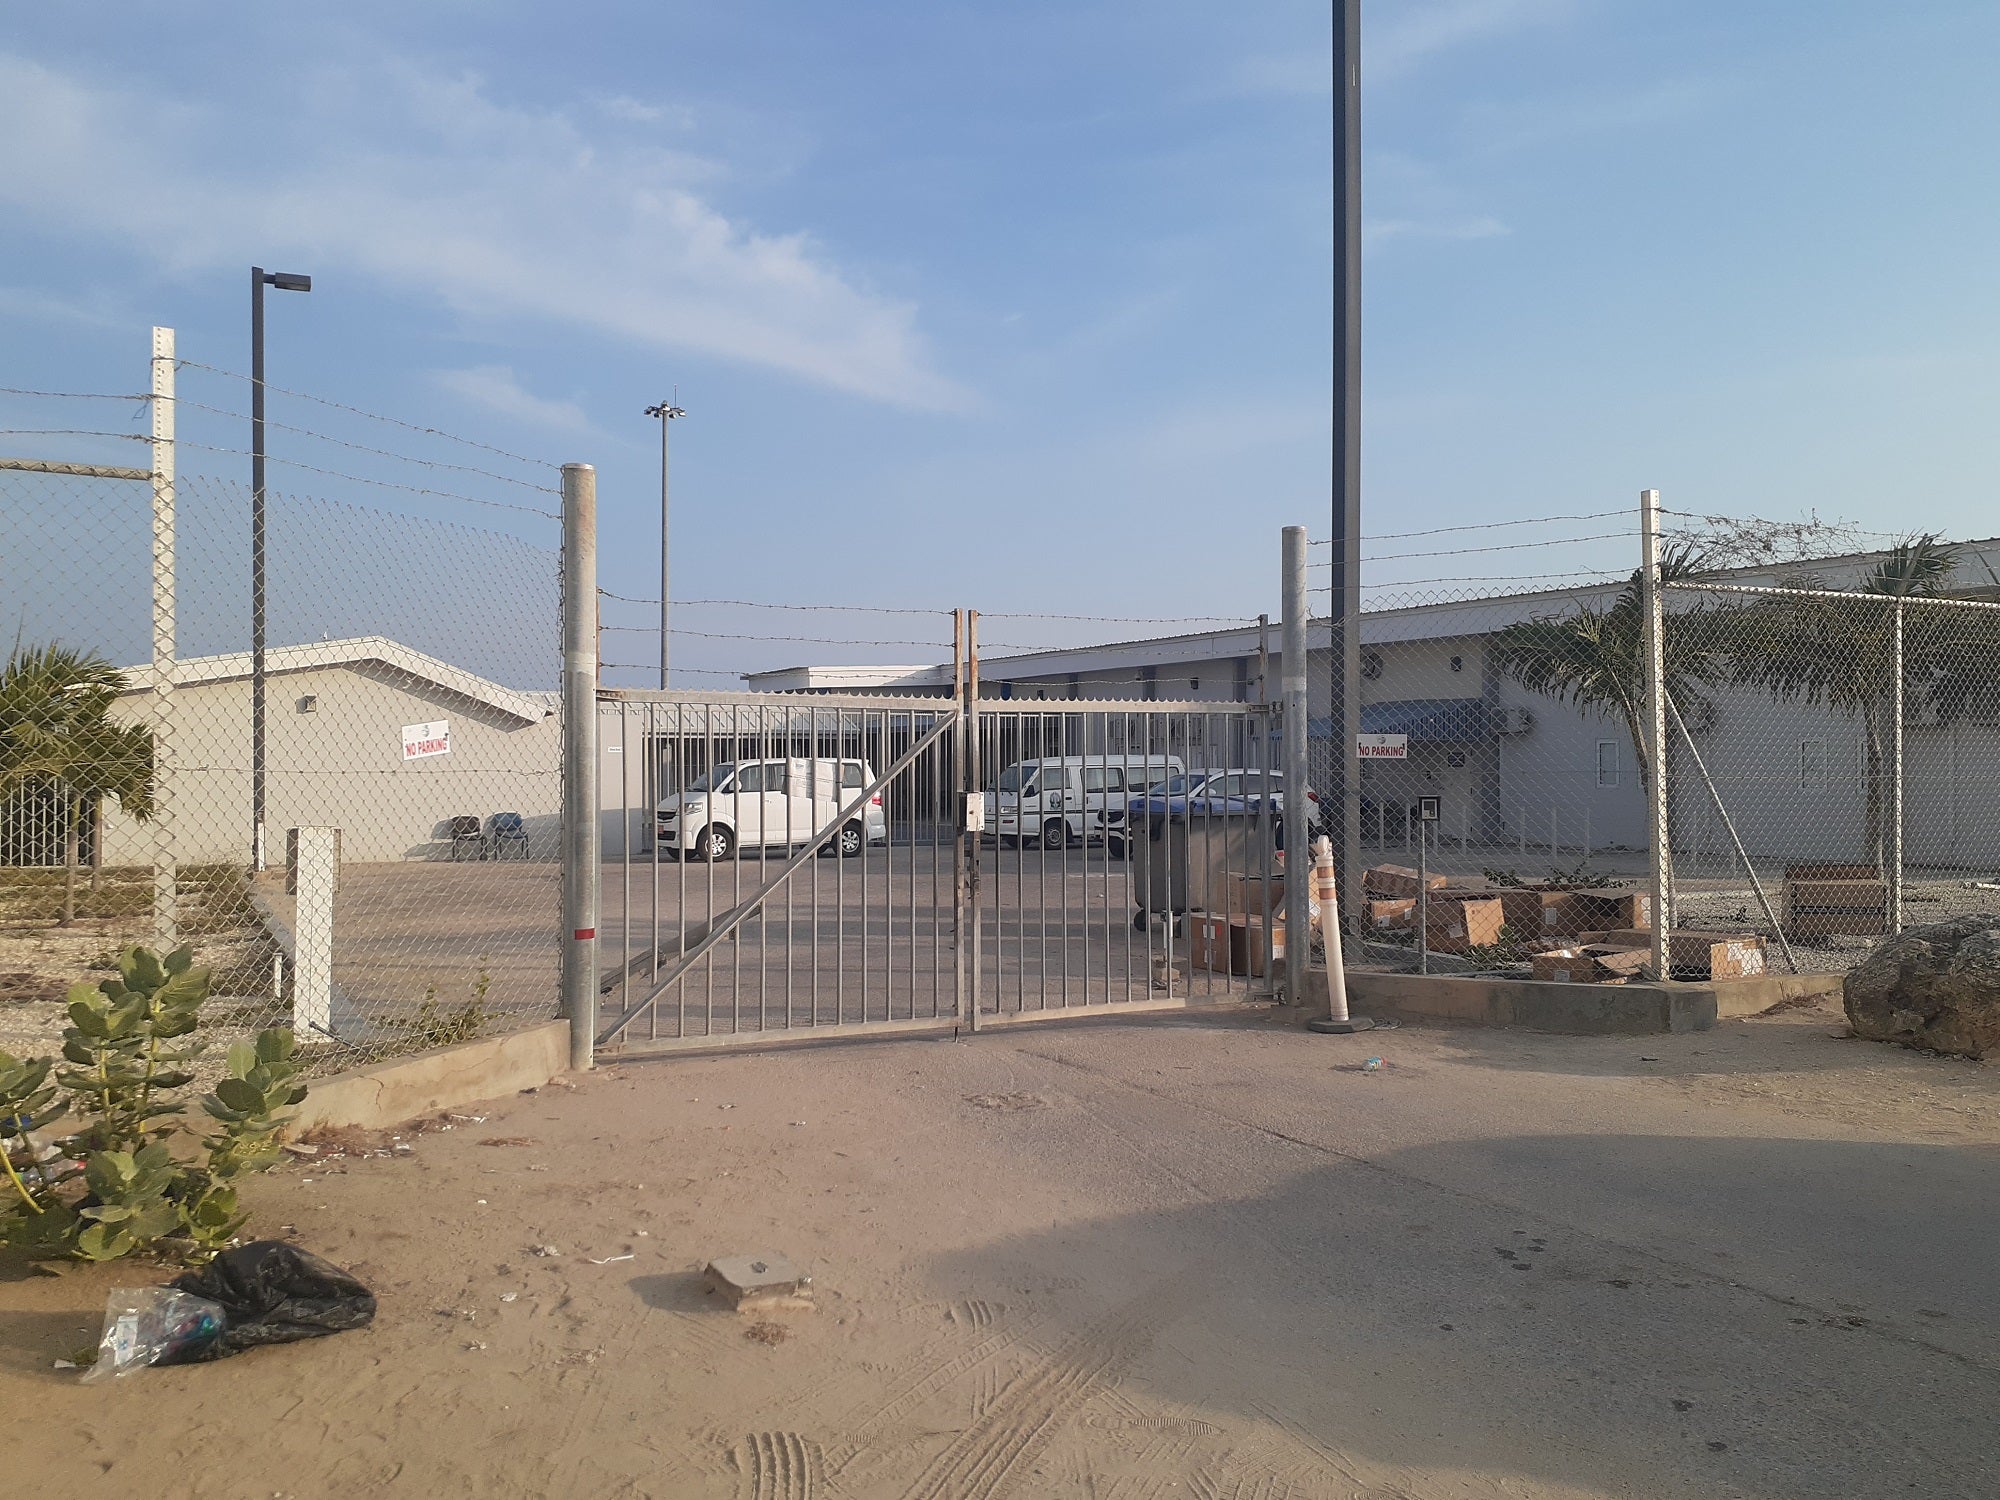 A photo showing the outside of a Guarda Nos Costa (GNC) immigration detention center in Aruba. 